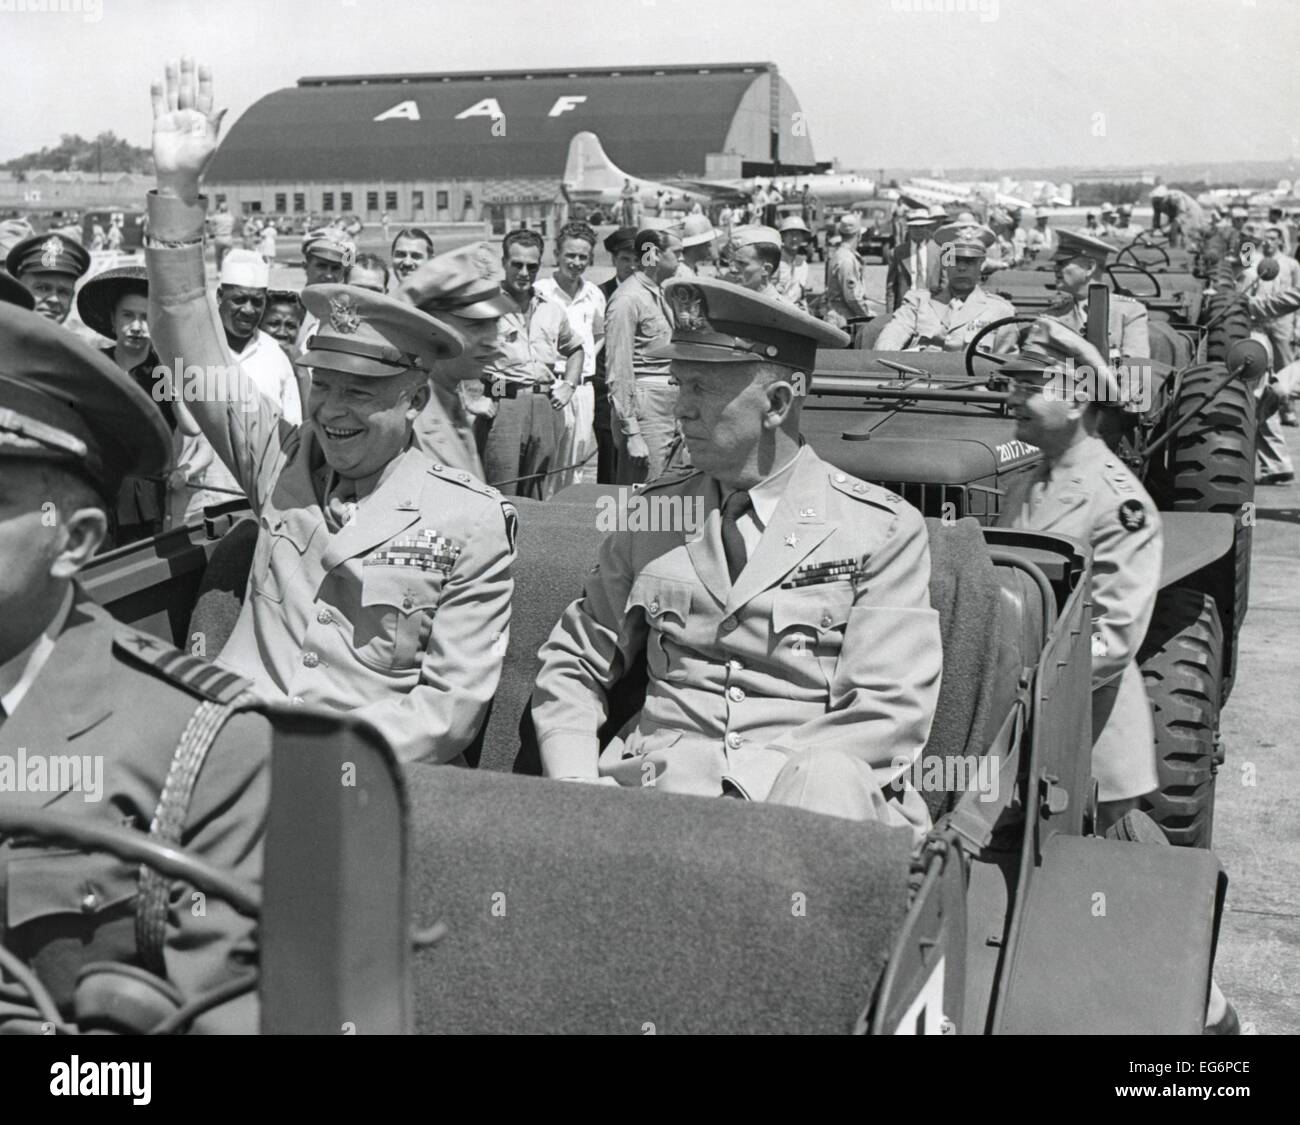 Generals Dwight Eisenhower and George Marshall sitting in a jeep at a Washington D.C. airport. Eisenhower is waving and Stock Photo